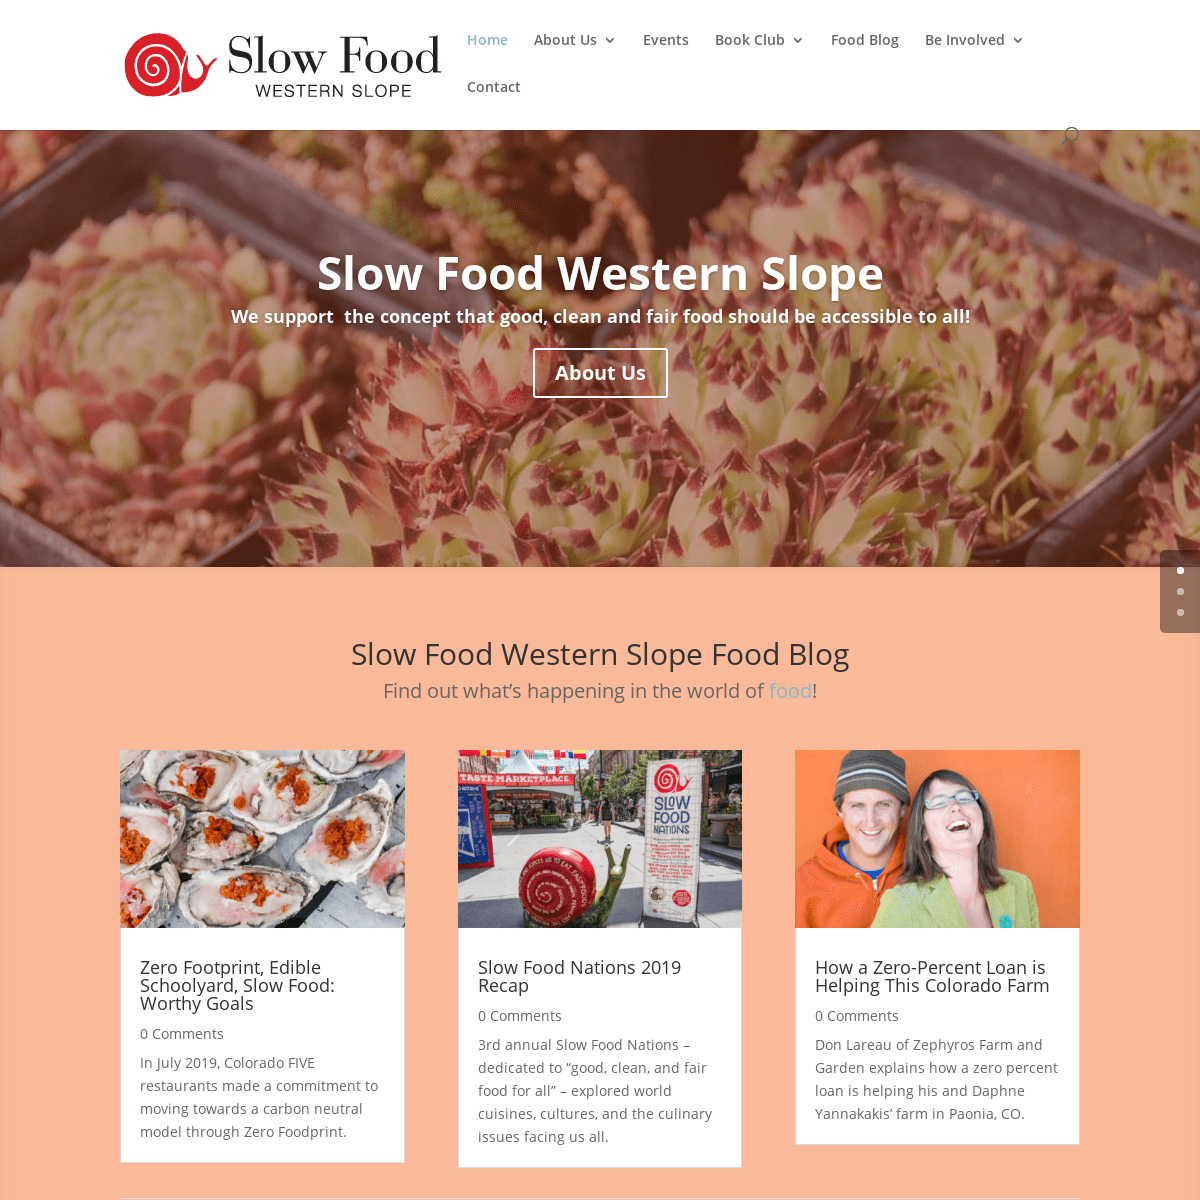 A complete backup of slowfoodwesternslope.org